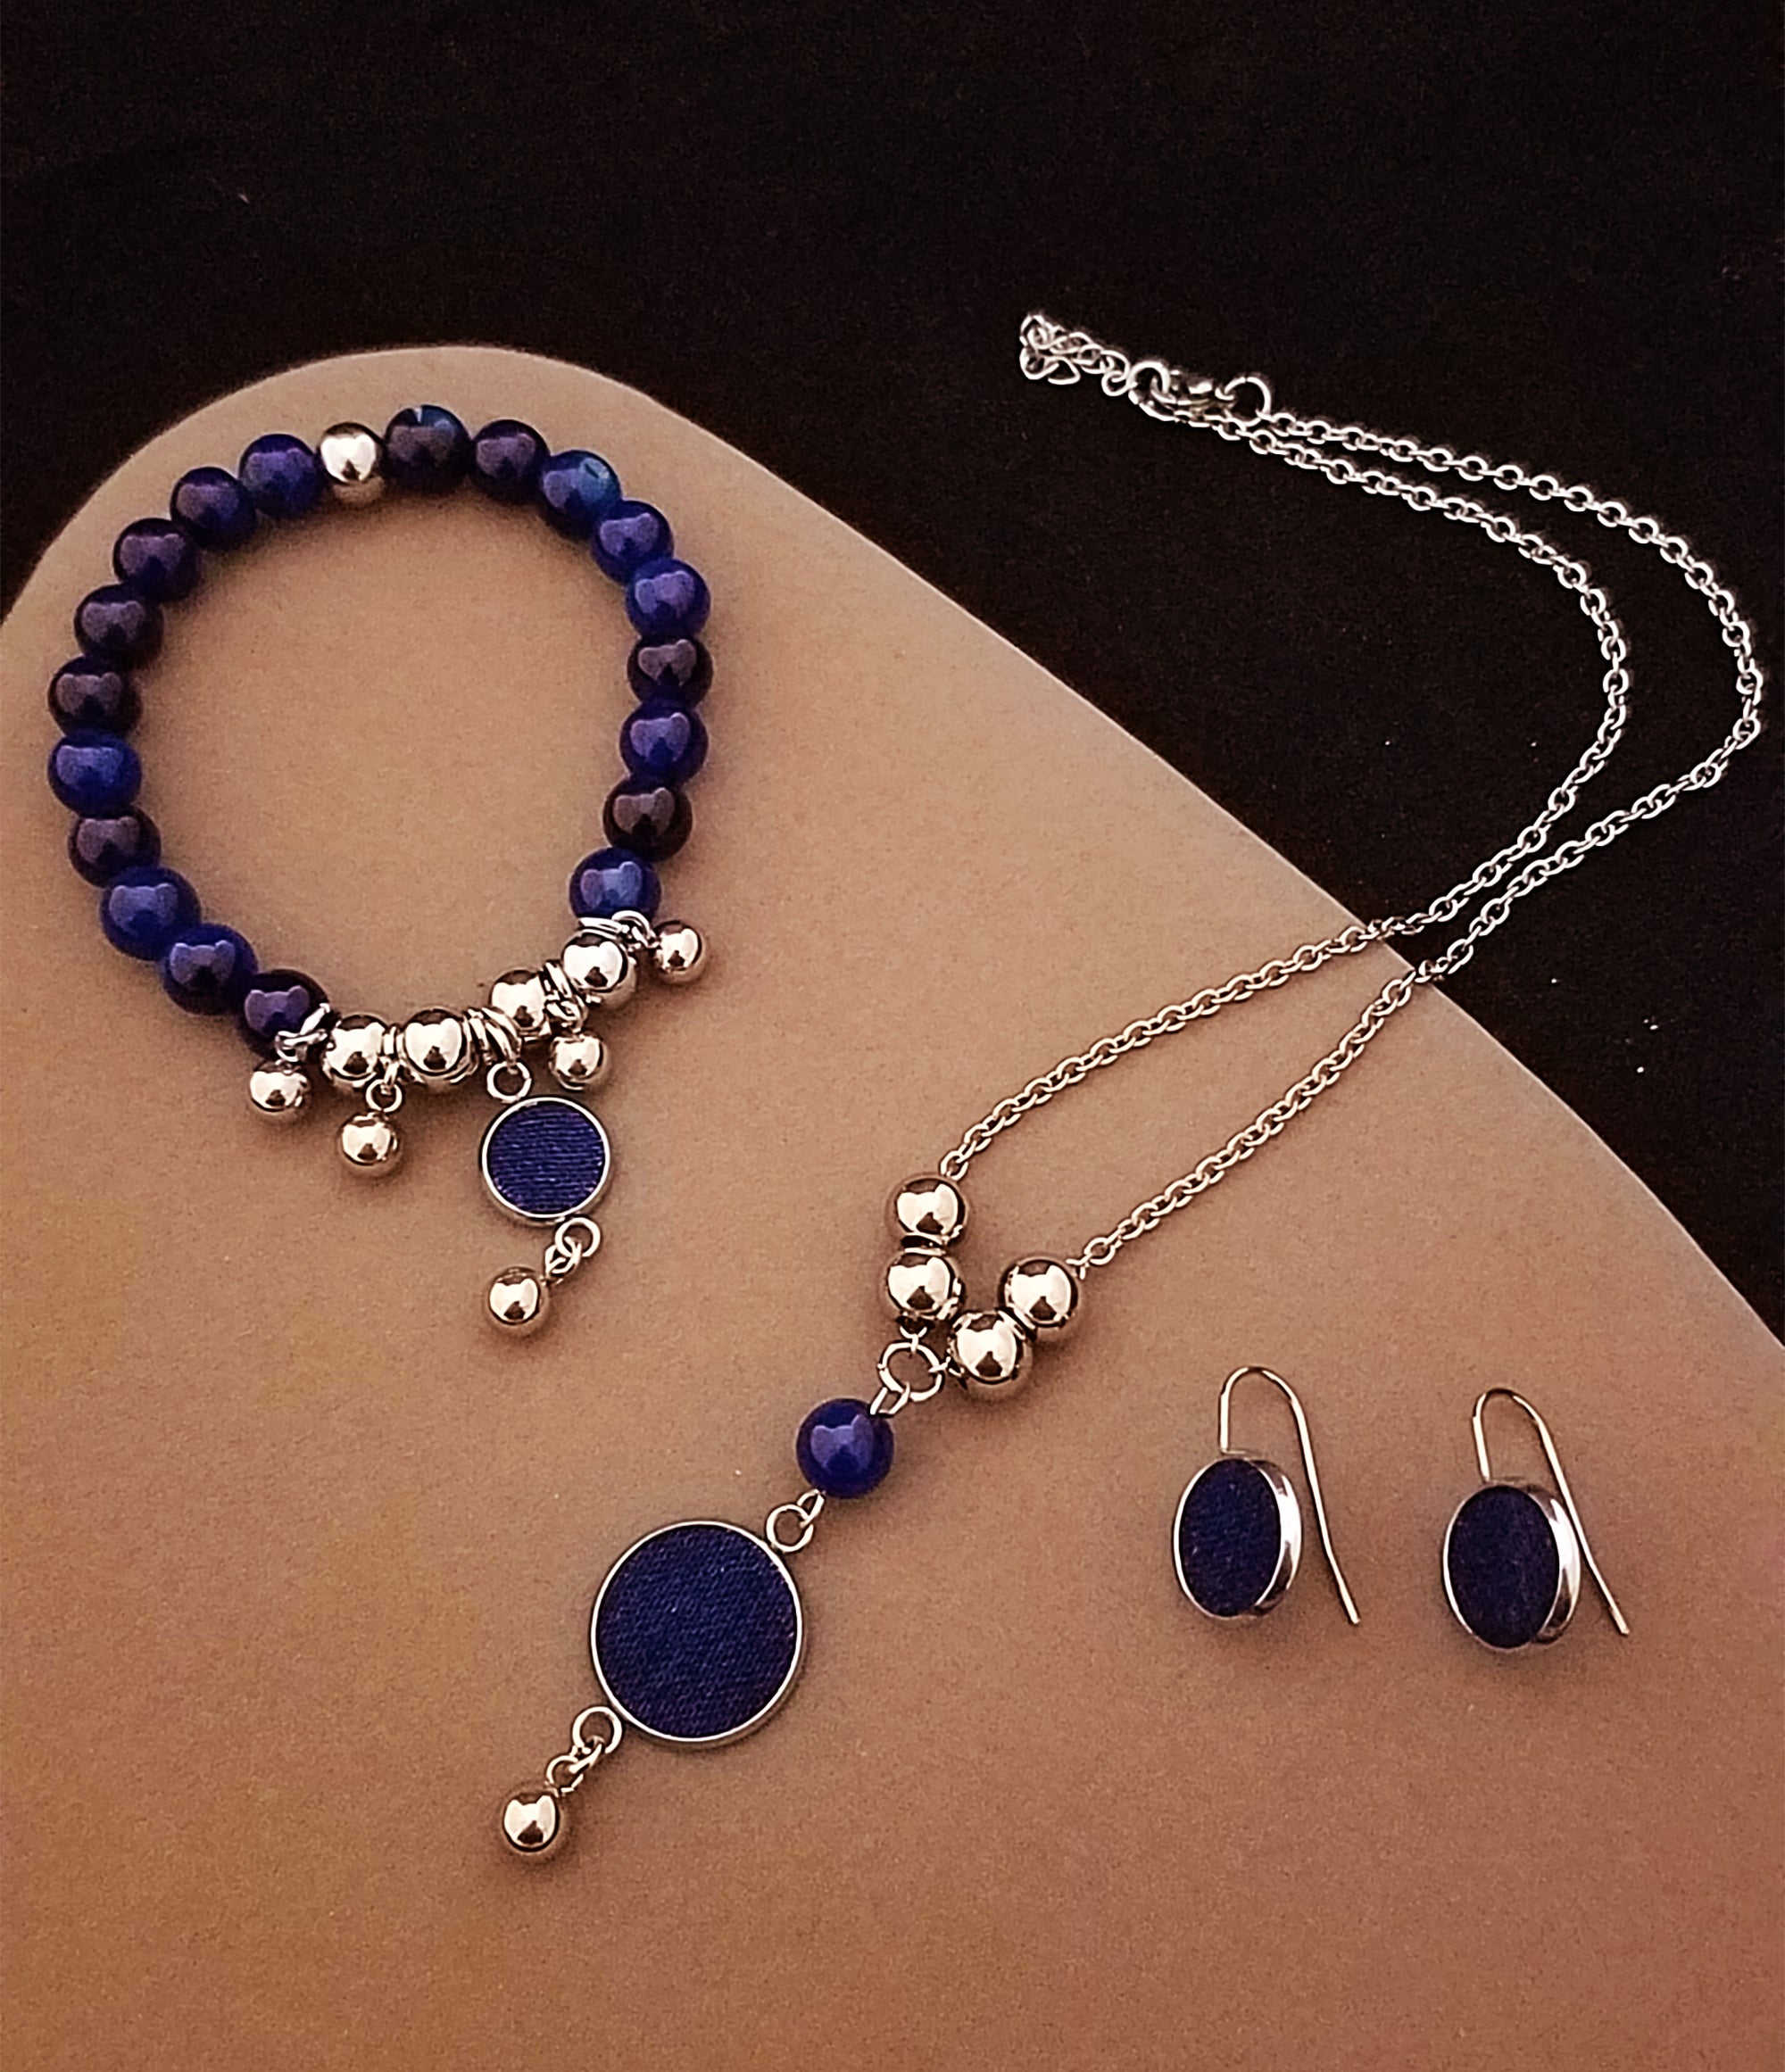 Stainless Steel necklace, bracelet and earrings set - SN039